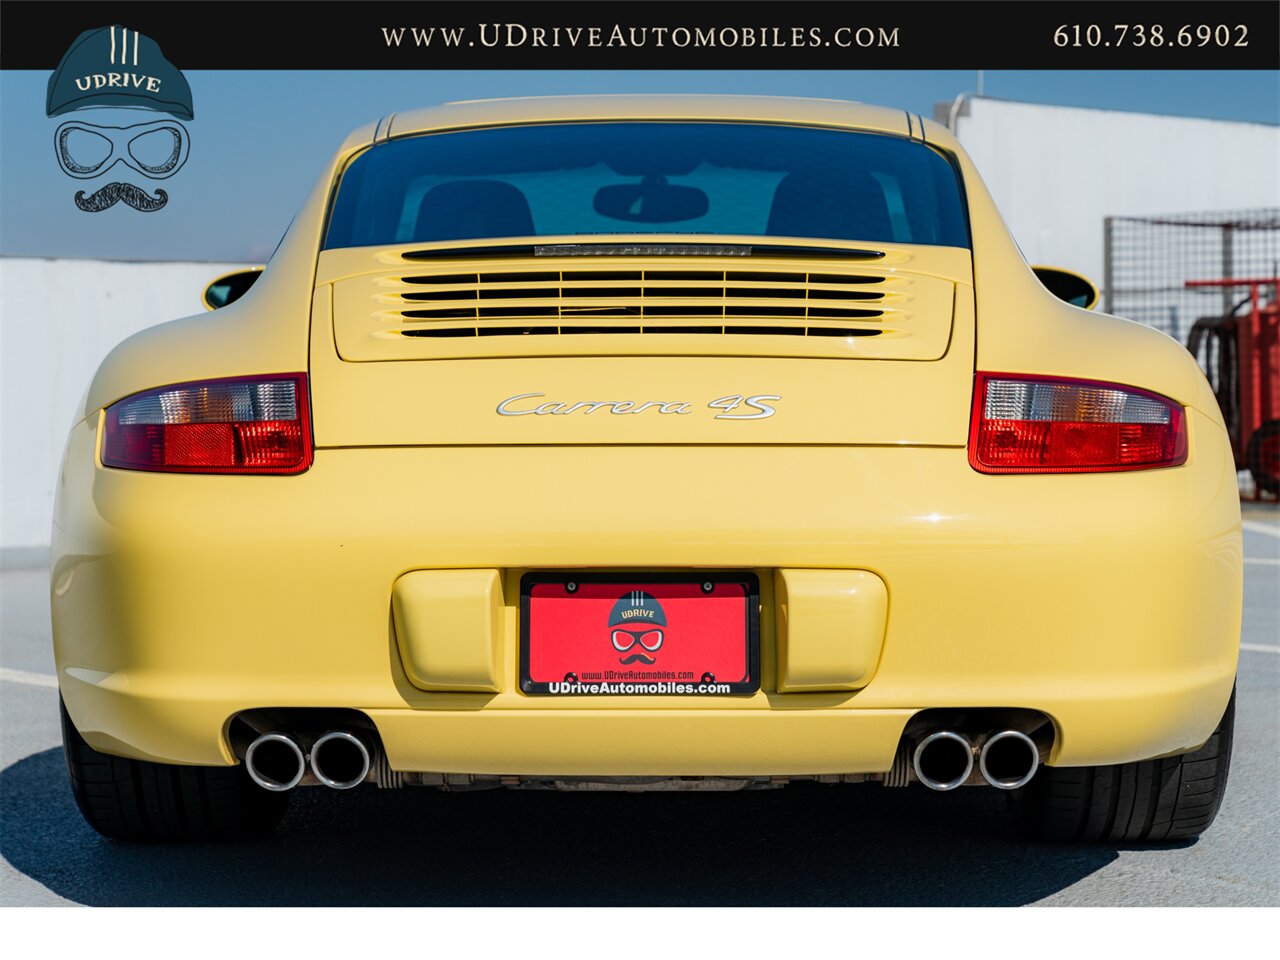 2007 Porsche 911 Carrera 4S 997 C4S Paint To Sample Pastel Yellow  6 Speed Sport Chrono Full Leather Yellow Gauges - Photo 20 - West Chester, PA 19382